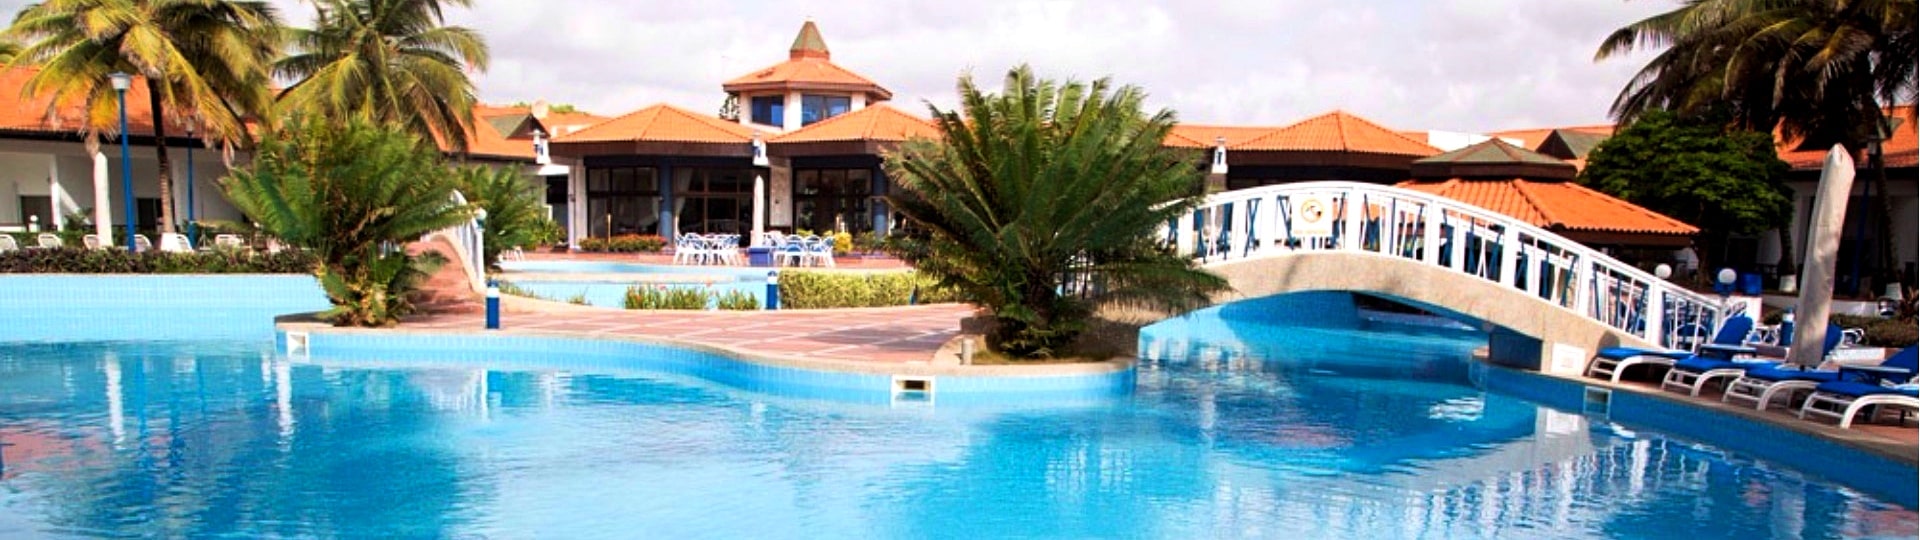 15 Best Swimming Pools in Accra, Ghana | Pools in Accra 4